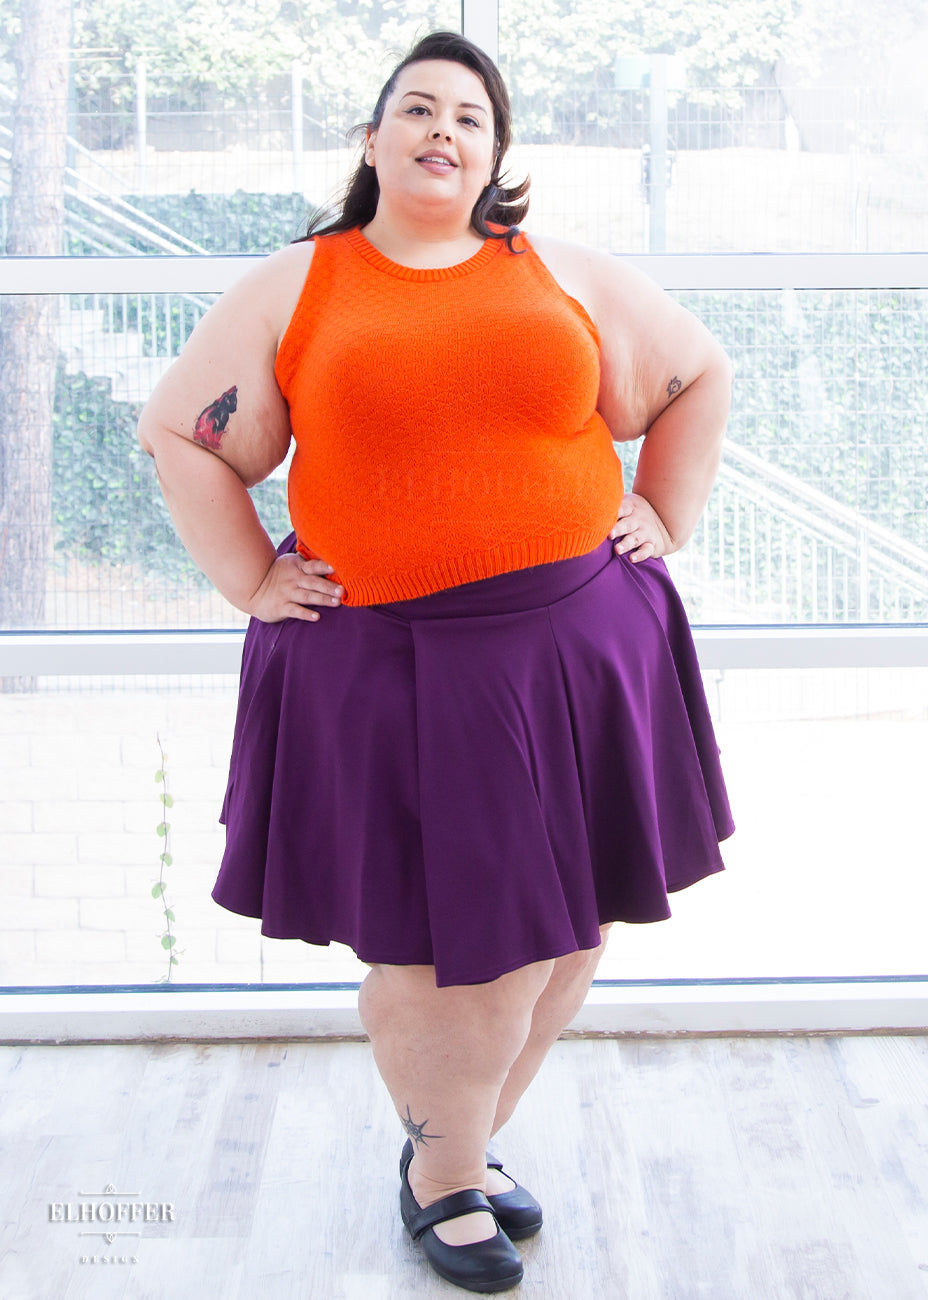 Angel is modeling the size 4XL skirt. She has a 55” Bust, 48” Waist, 68” Hips, and is 5’3”.